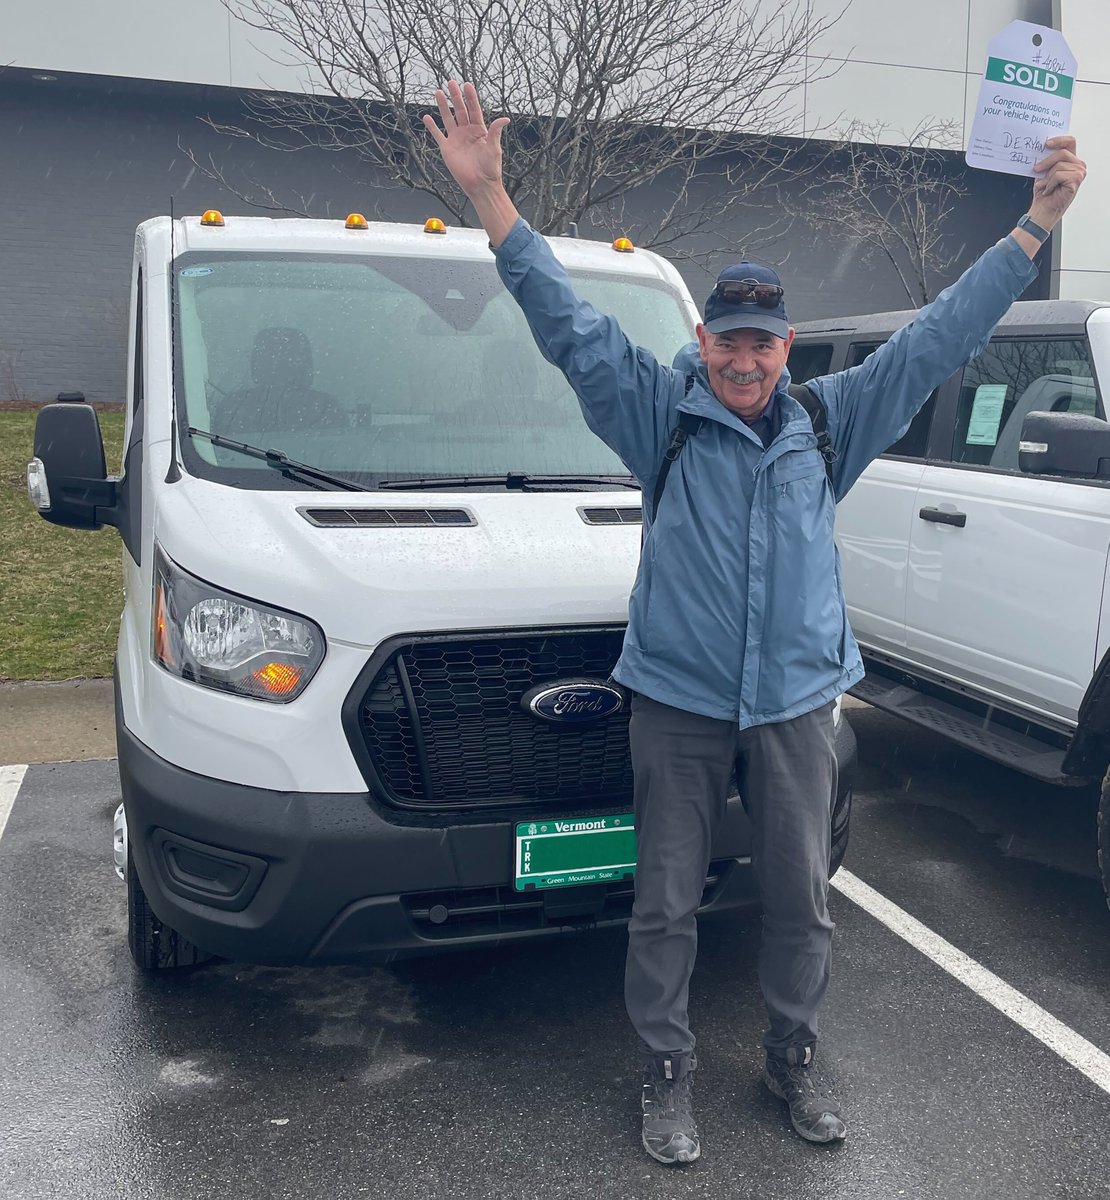 Happy #NewTruckDay to Tim! He couldn't contain his excitement as he got ready to take home his new @Ford Transit work van, picked out with some help from Bill Labonte - Congrats!

Learn more about Bill & check out his reviews on @DealerRater: bit.ly/2wZZj44

#Ford #HTeam